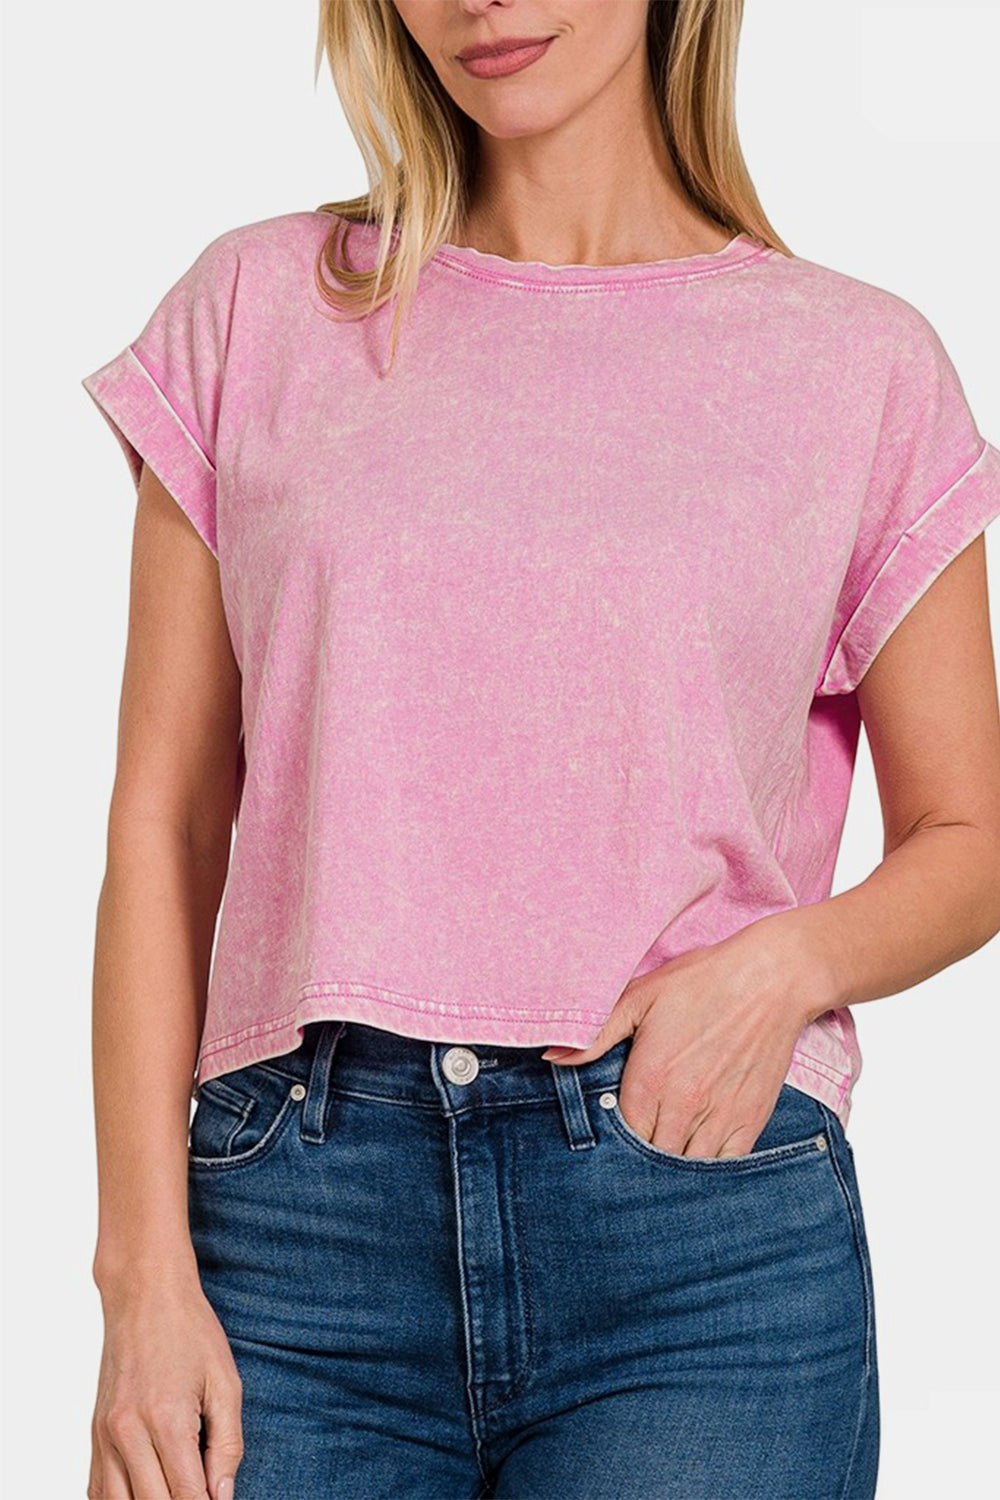 Washed Cotton Cuffed Short Sleeve Top